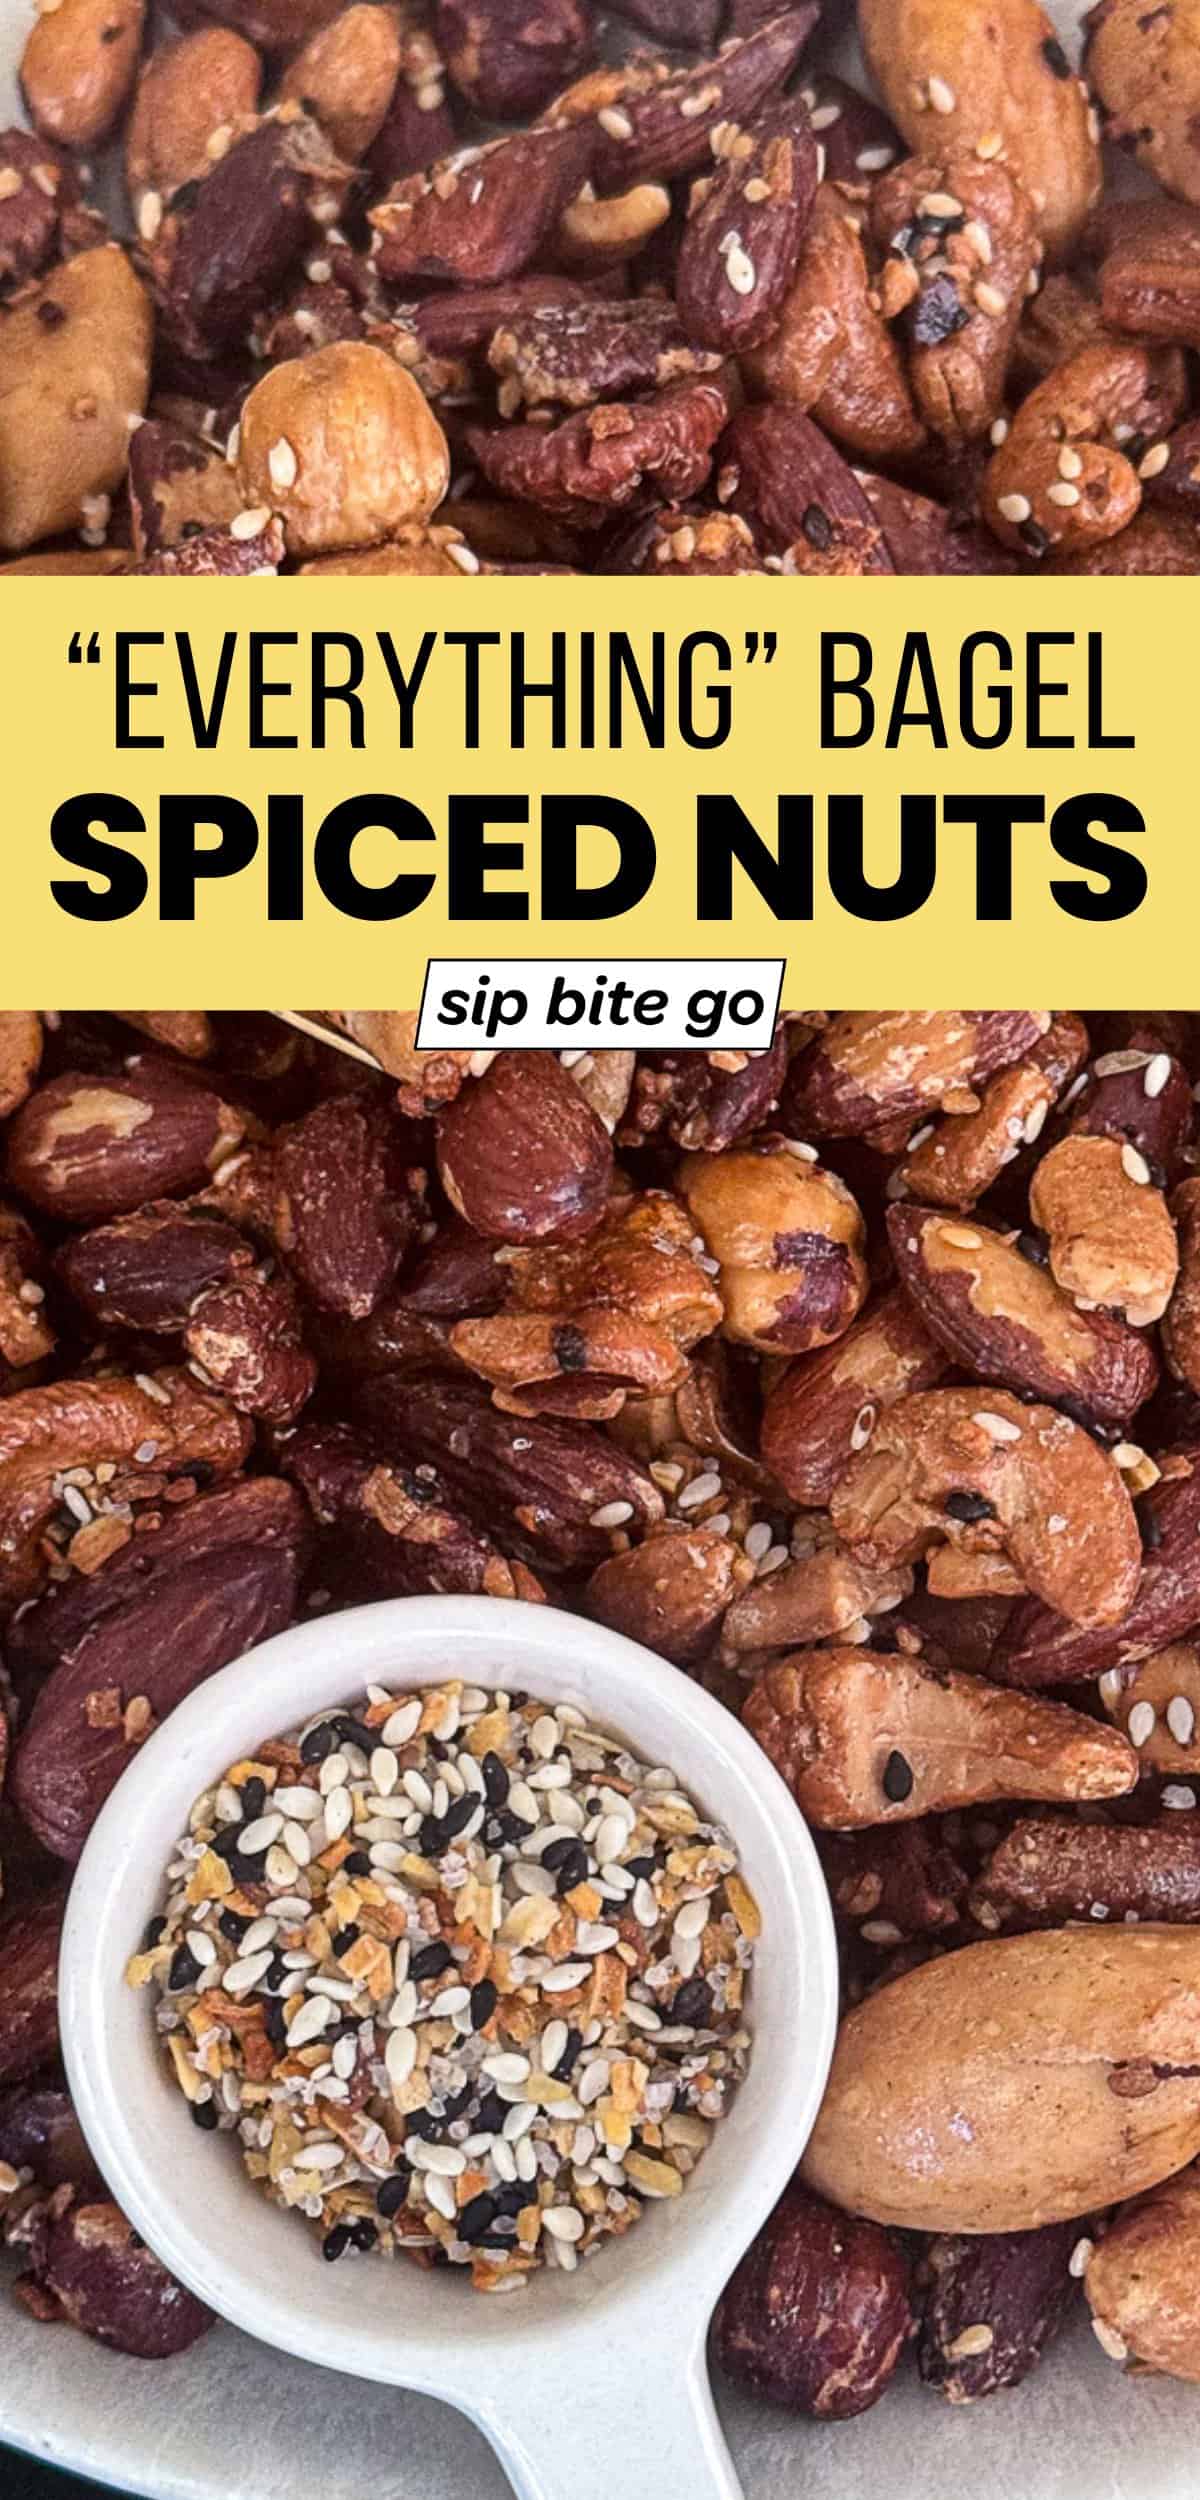 Everything Bagel Spiced Nuts Recipe with text overlay